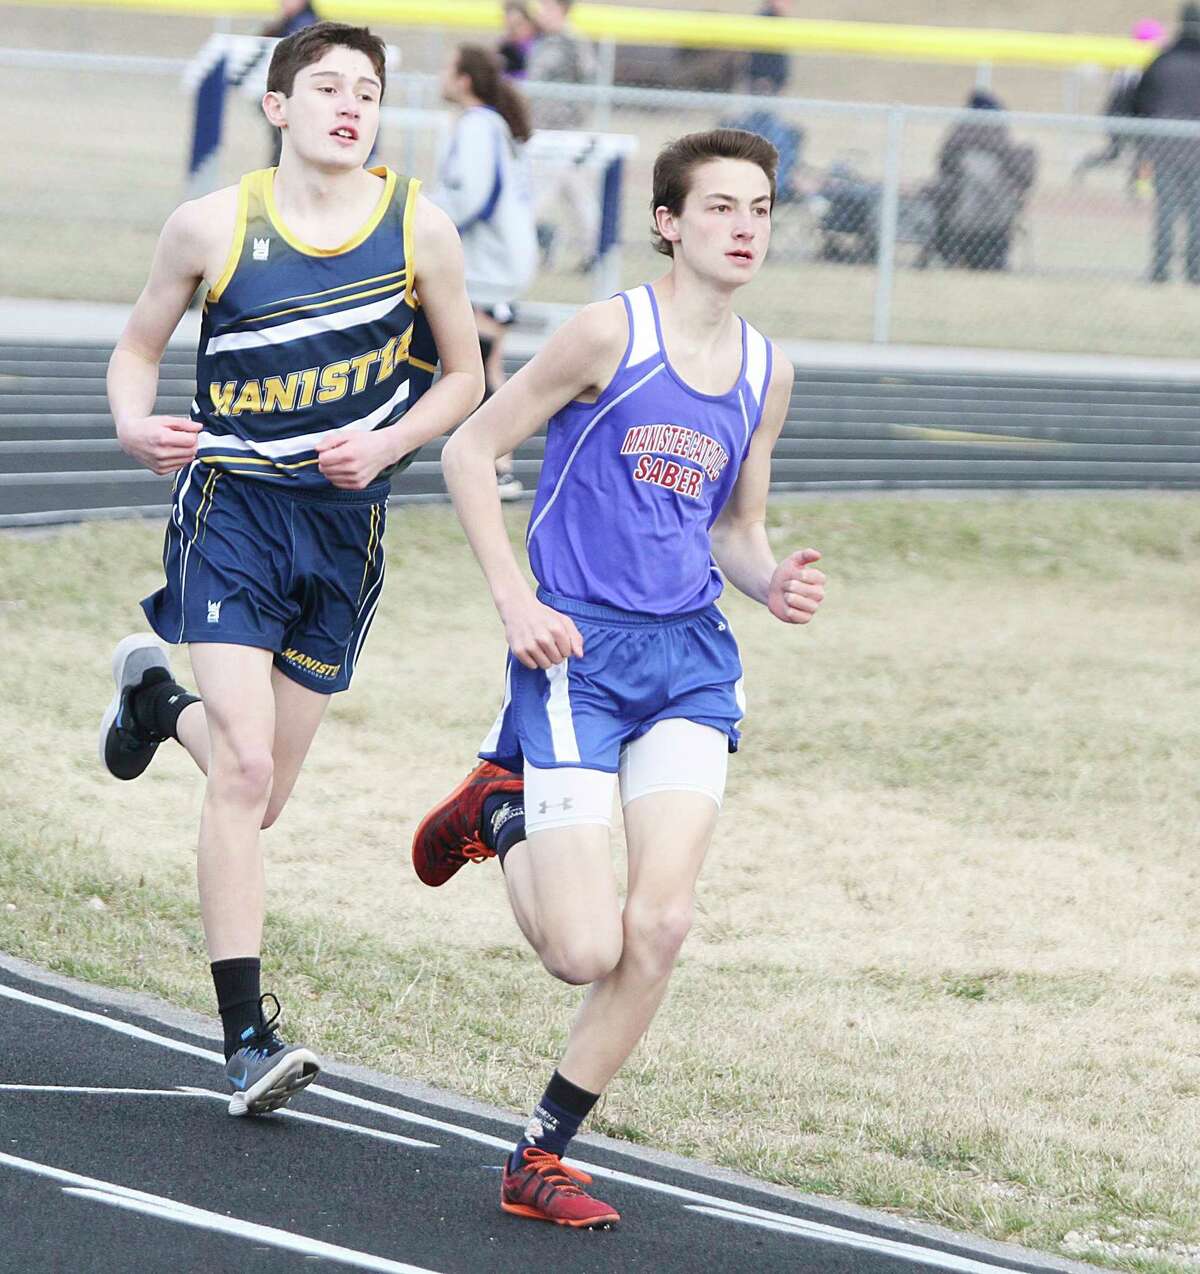 Saber junior Henry Hybza was looking forward to a strong track and field season. (News Advocate file photo)